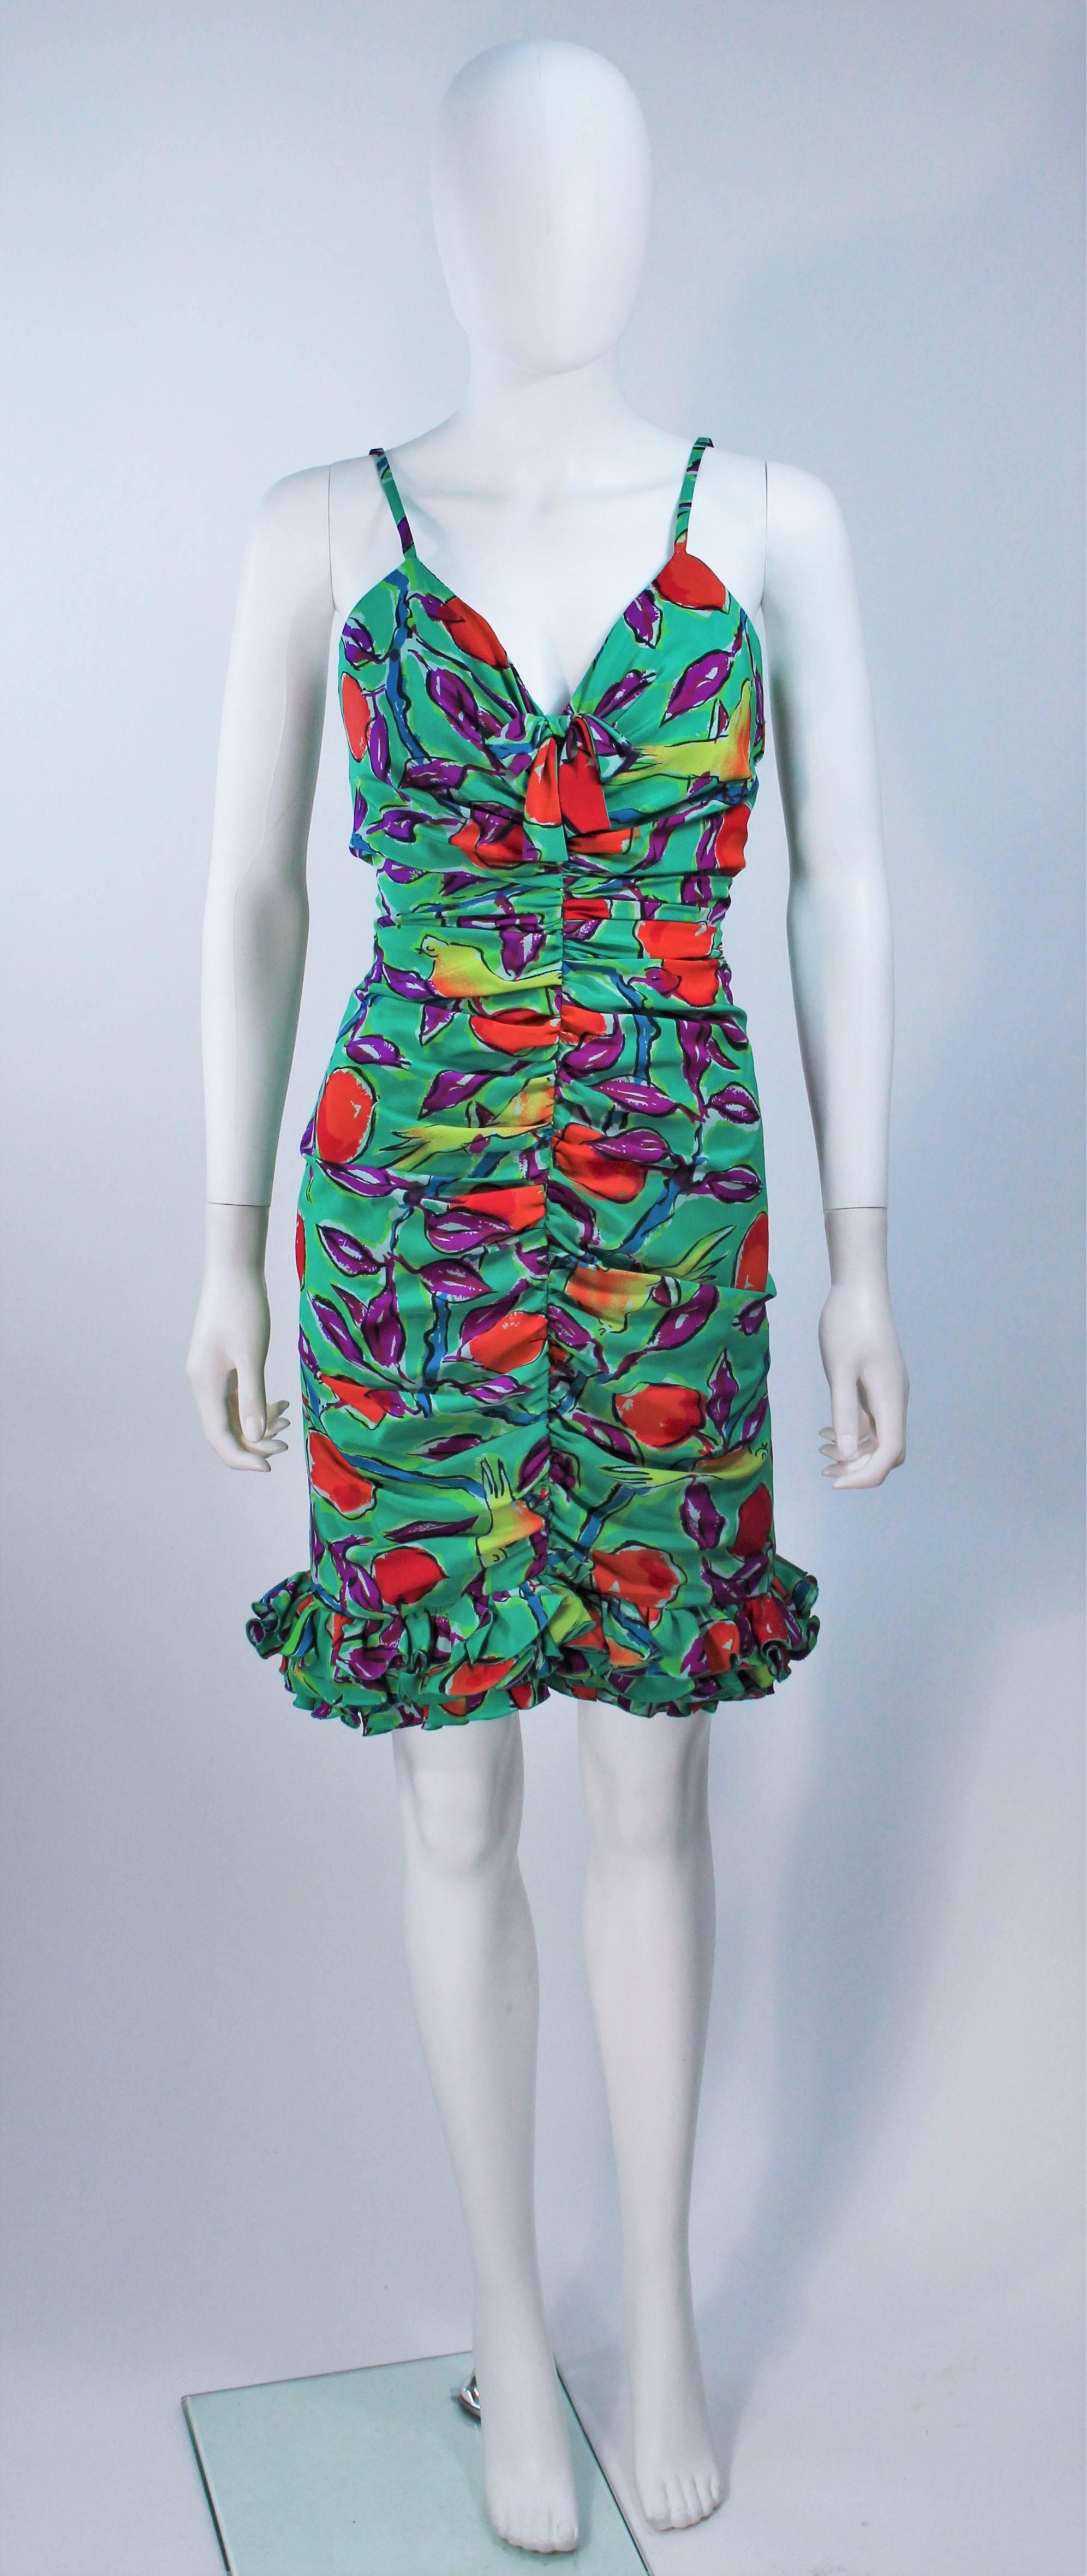 EMANUEL UNGARO Silk Cocktail Dress with Coat Size 8 In Excellent Condition For Sale In Los Angeles, CA